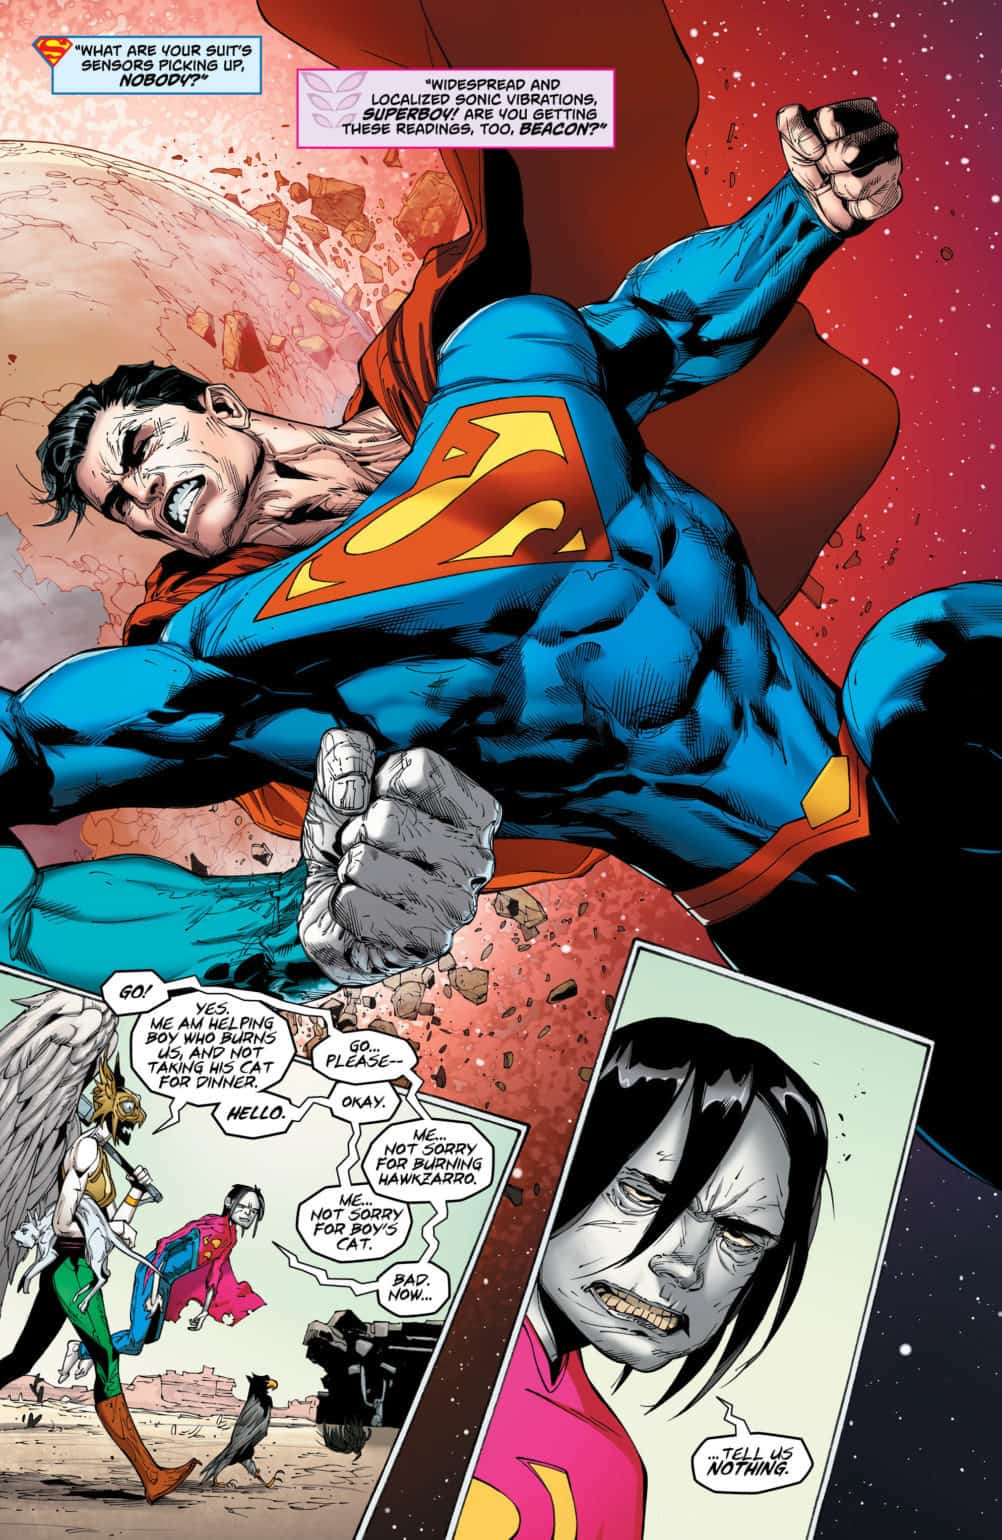 Exclusive Preview: SUPERMAN #44